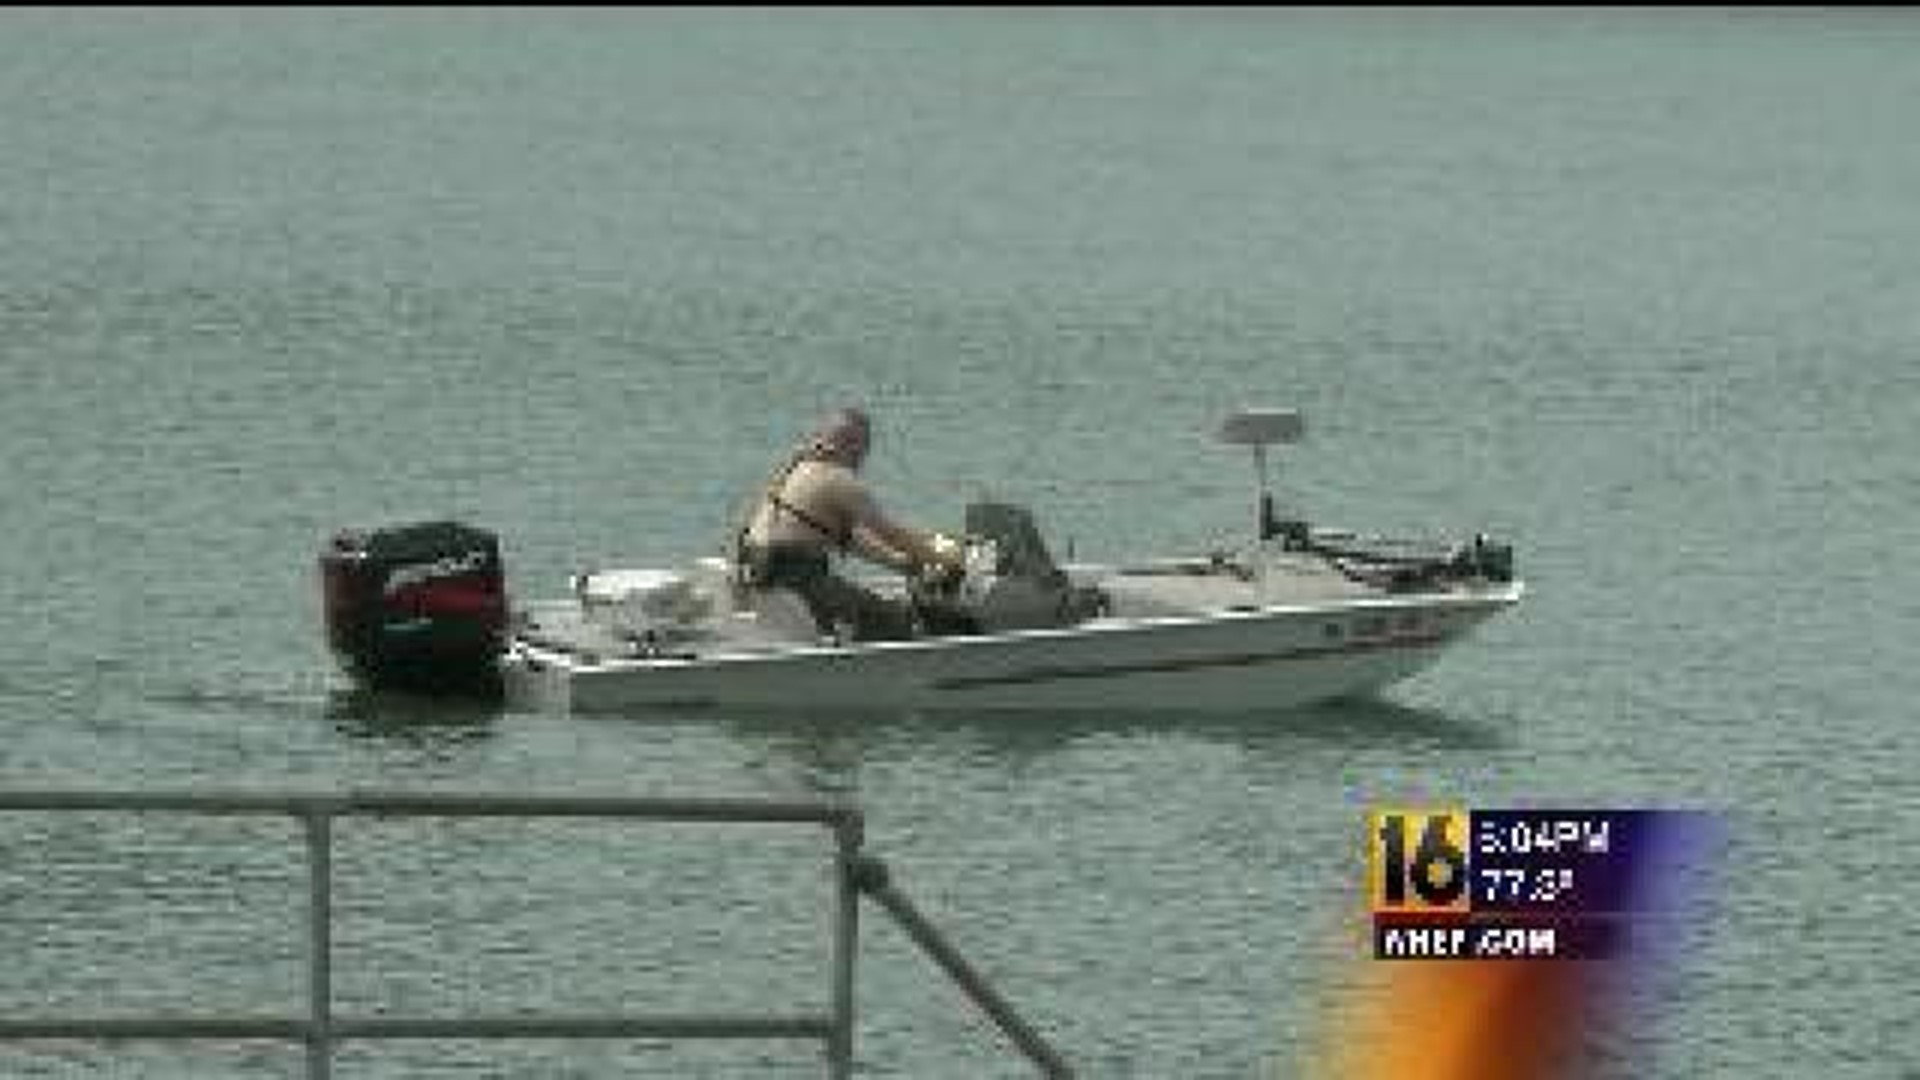 Search For Missing Fisherman In Carbon County